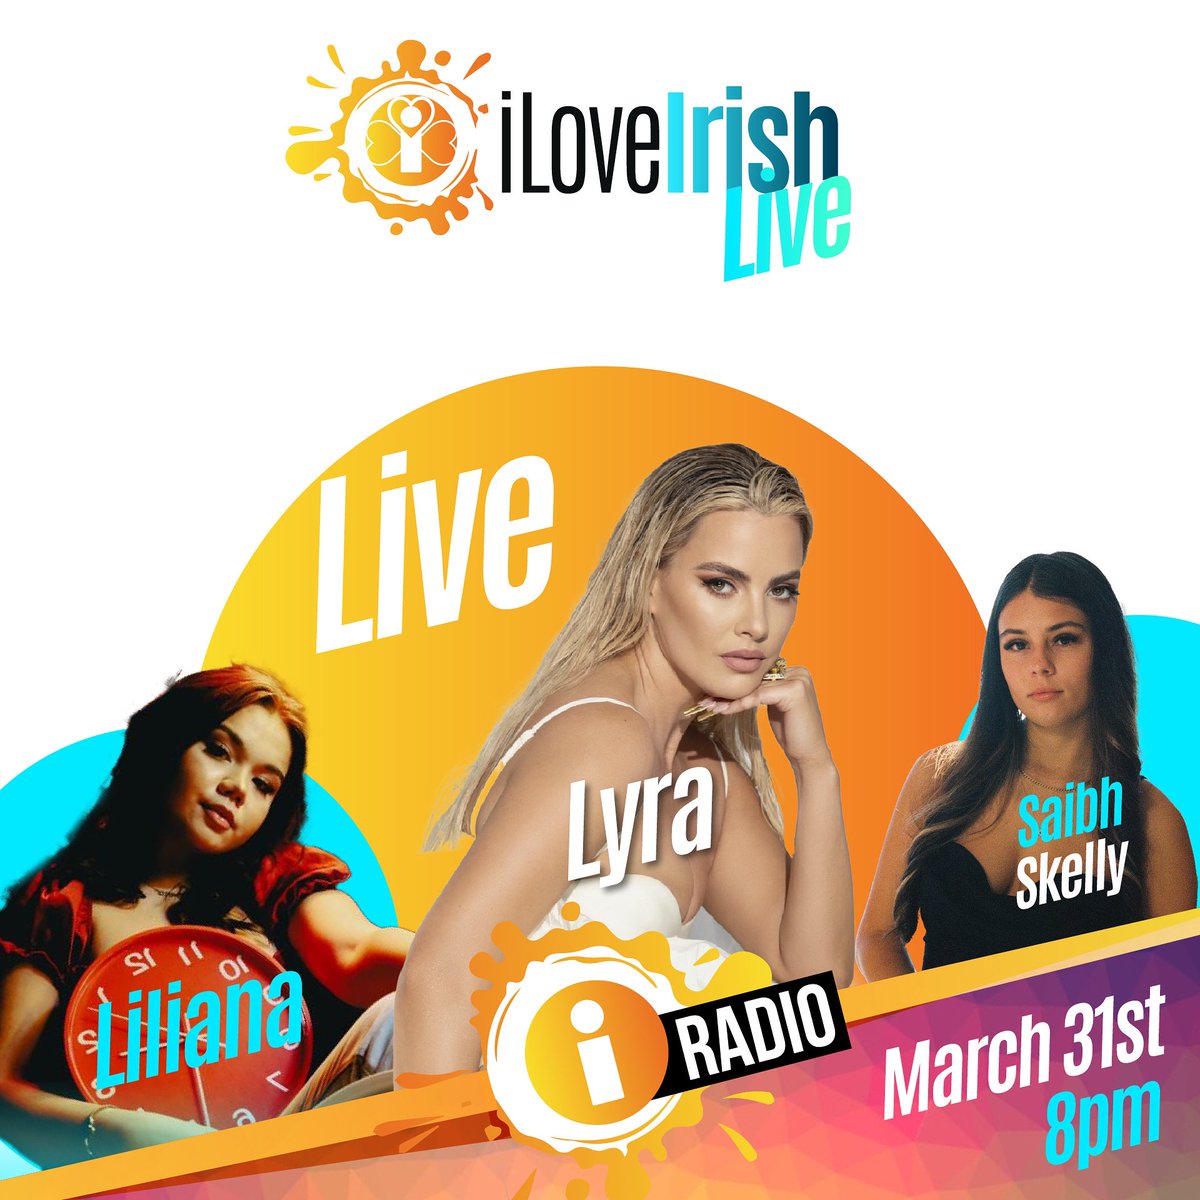 Next week I’m doing a special gig for @thisisiradio and I can’t wait to see you all 🤍 I’ll be joined by these two amazing girls @saibhskelly1 & Liliana 🔥